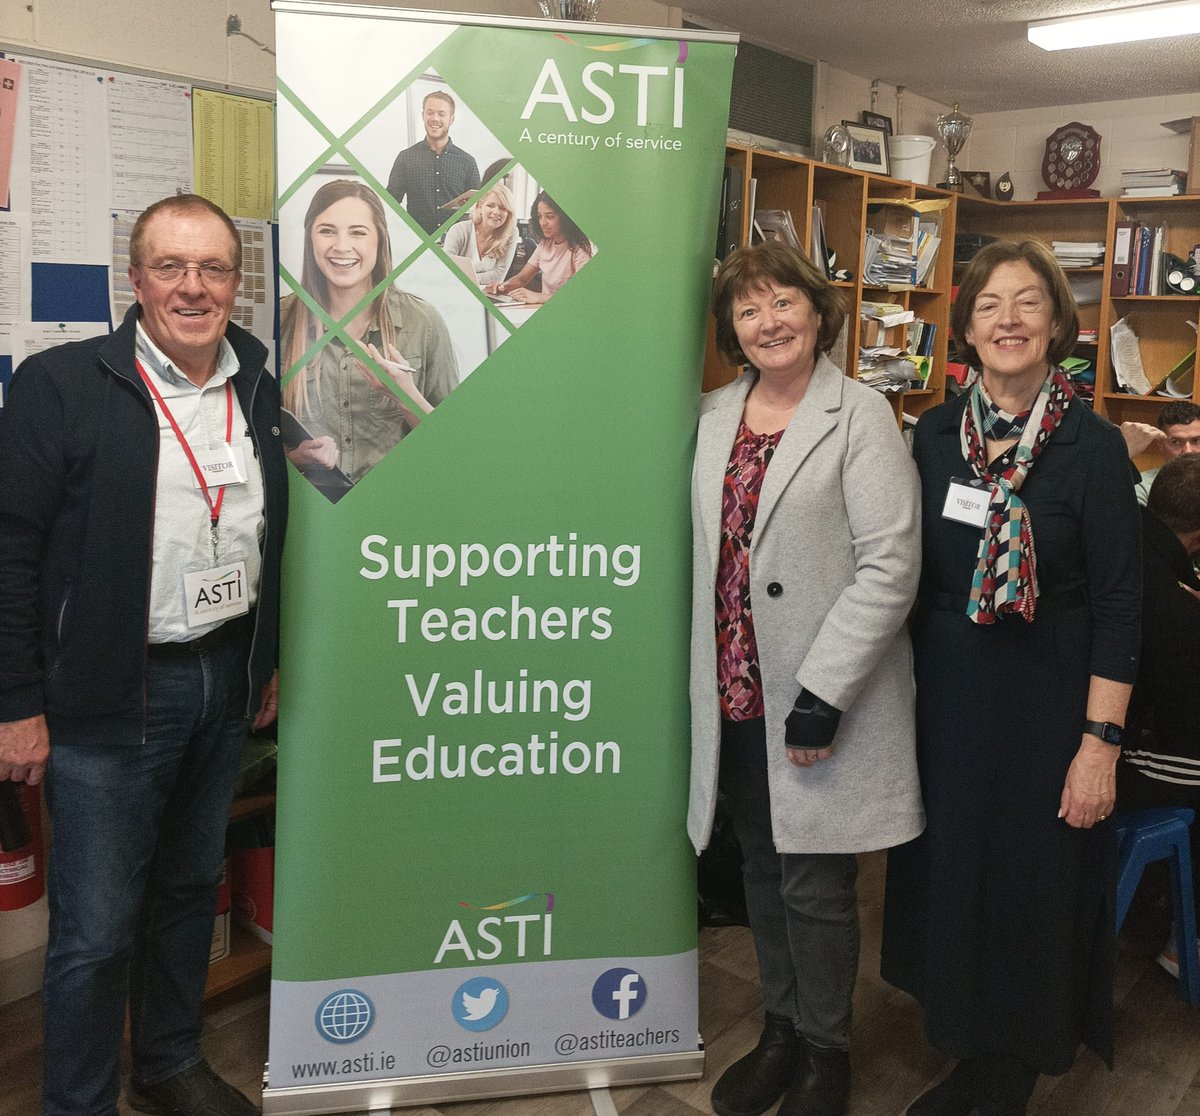 Michael McGrath, ASTI Honorary National Organiser pictured with current school steward Geraldine Hanley and Breda Lynch, ASTI Industrial Relations Official on a visit to Gort Community School on Friday March 21st @OfficialGortCS